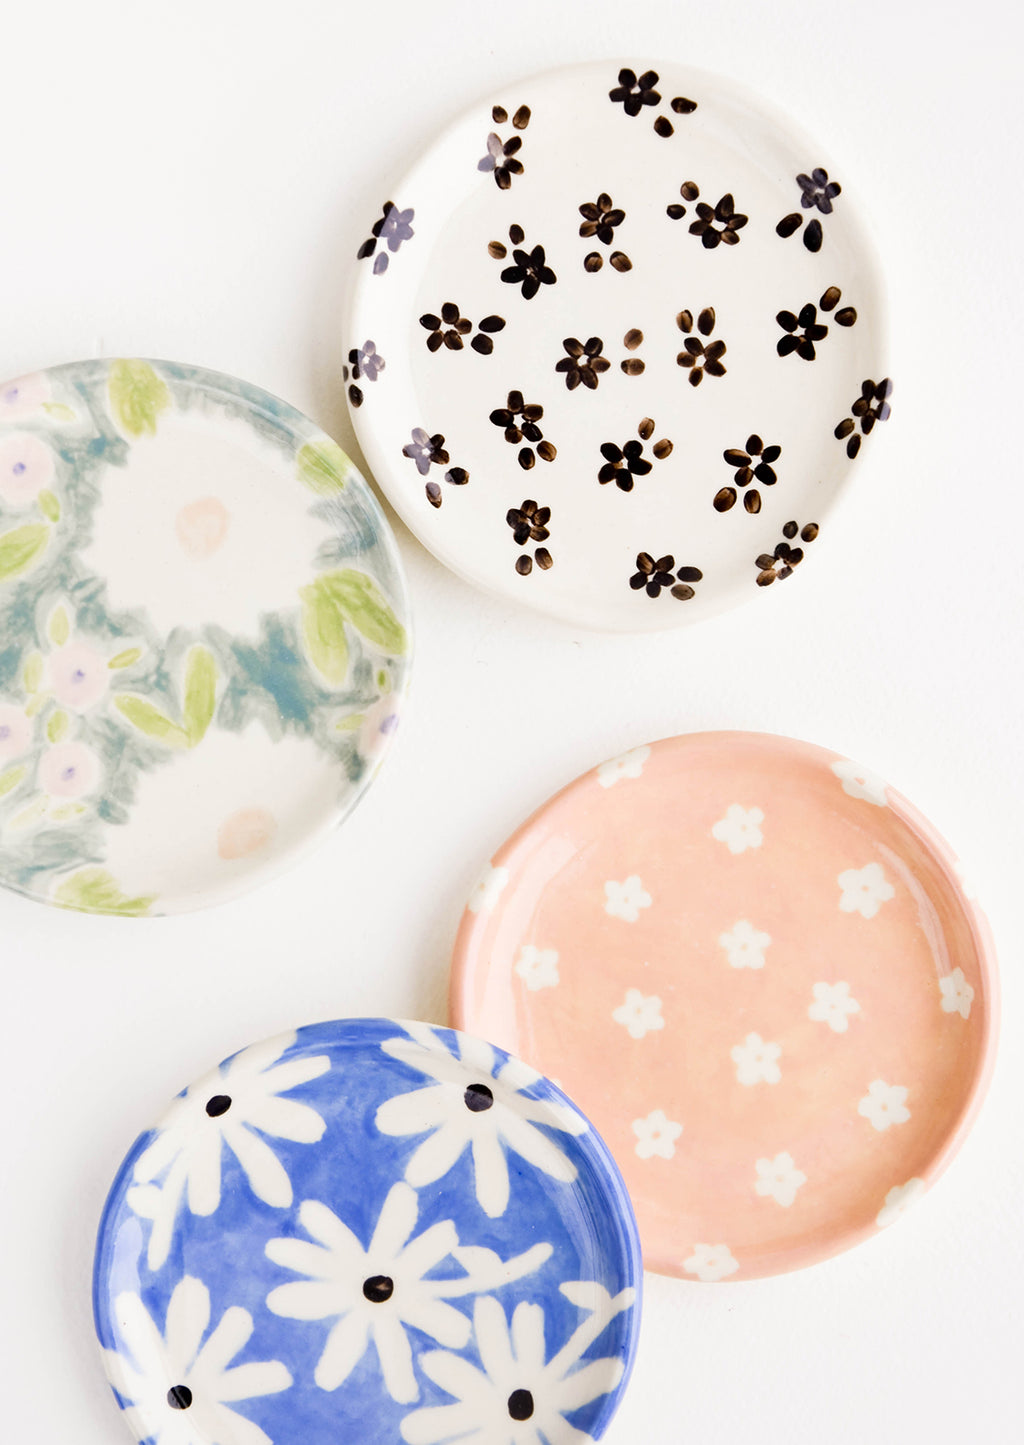 3: Round ceramic jewelry dishes in a mix of floral patterns